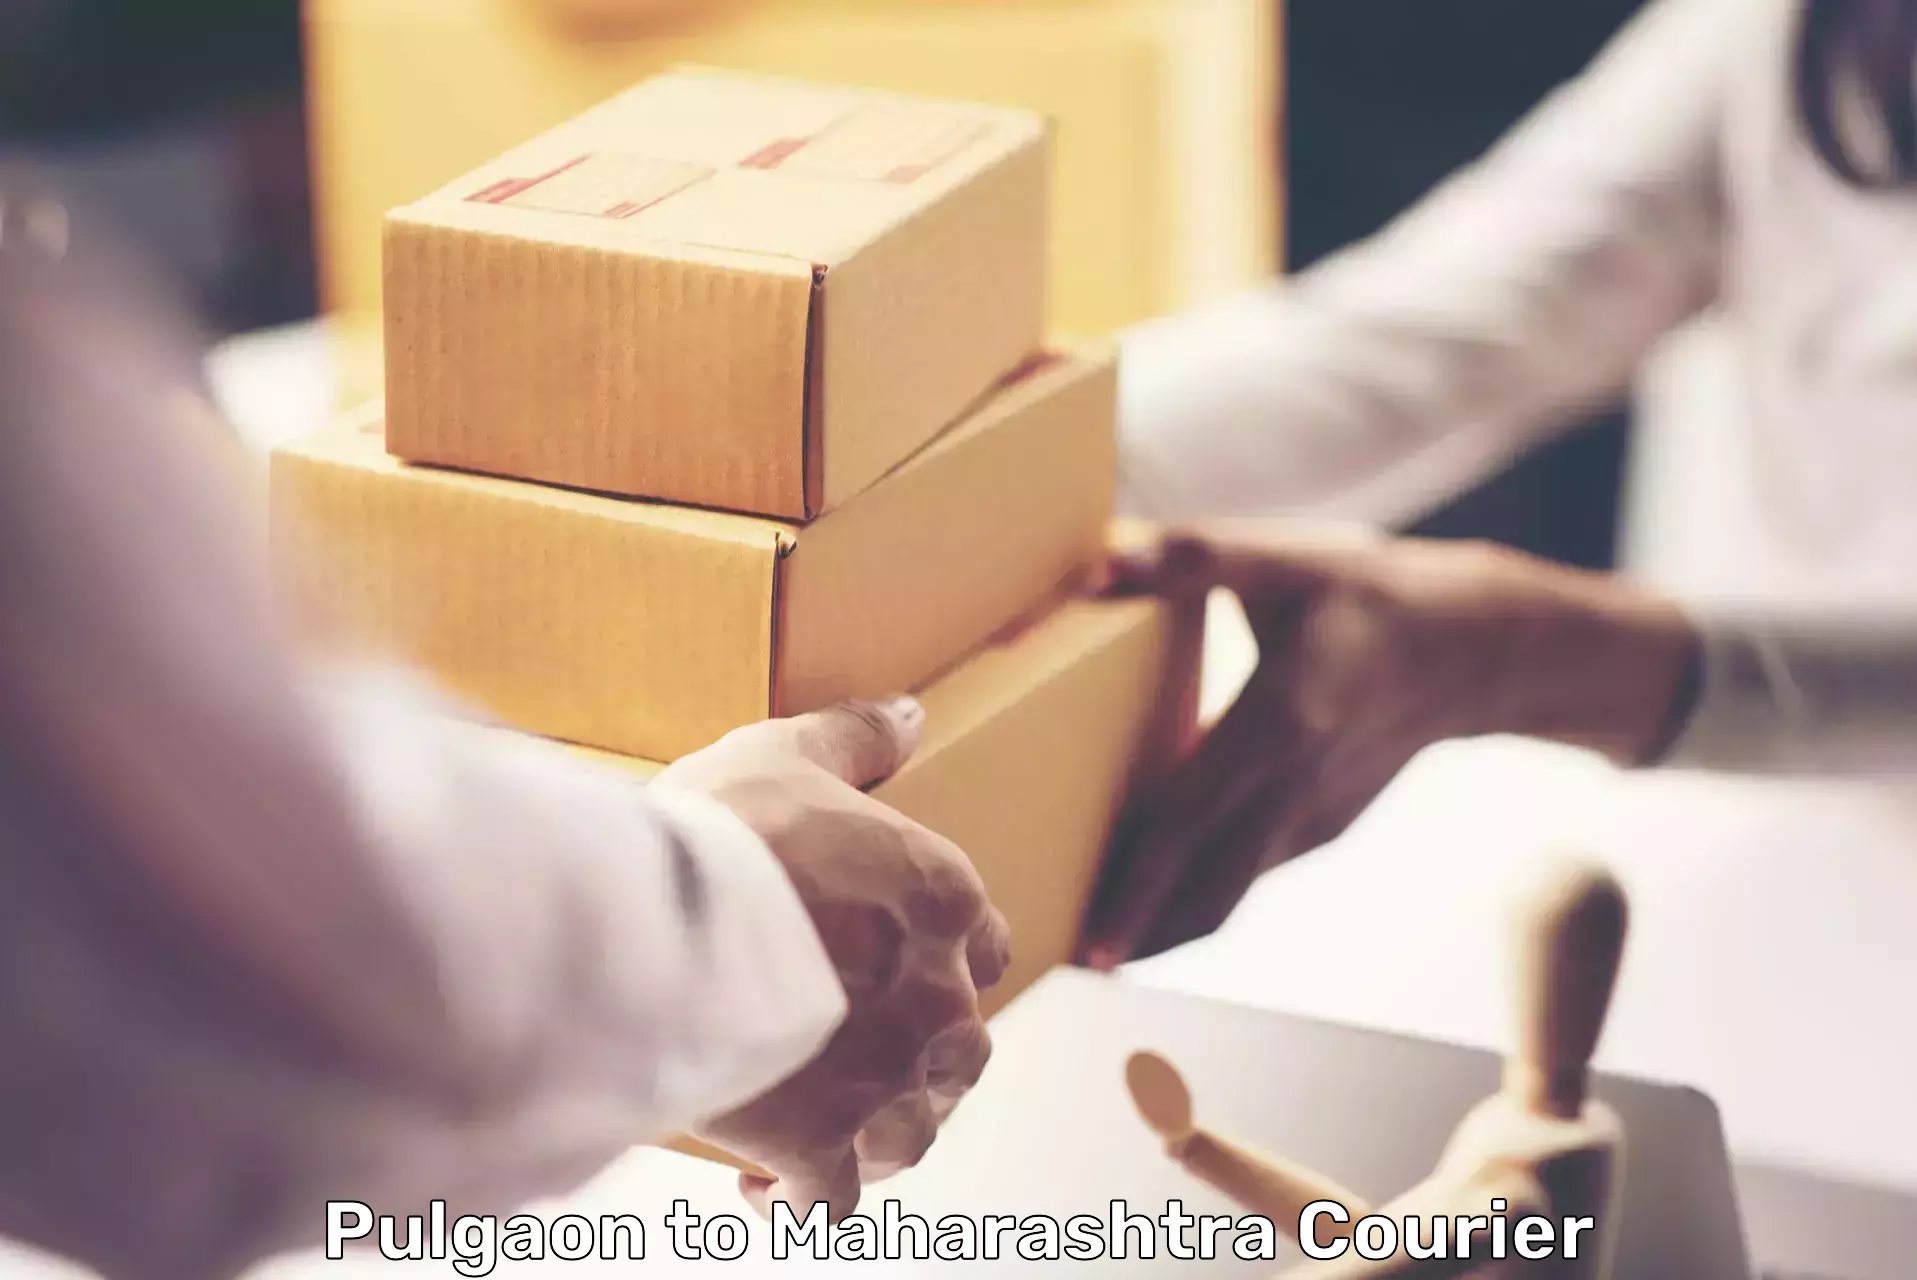 Custom courier packaging Pulgaon to Sillod